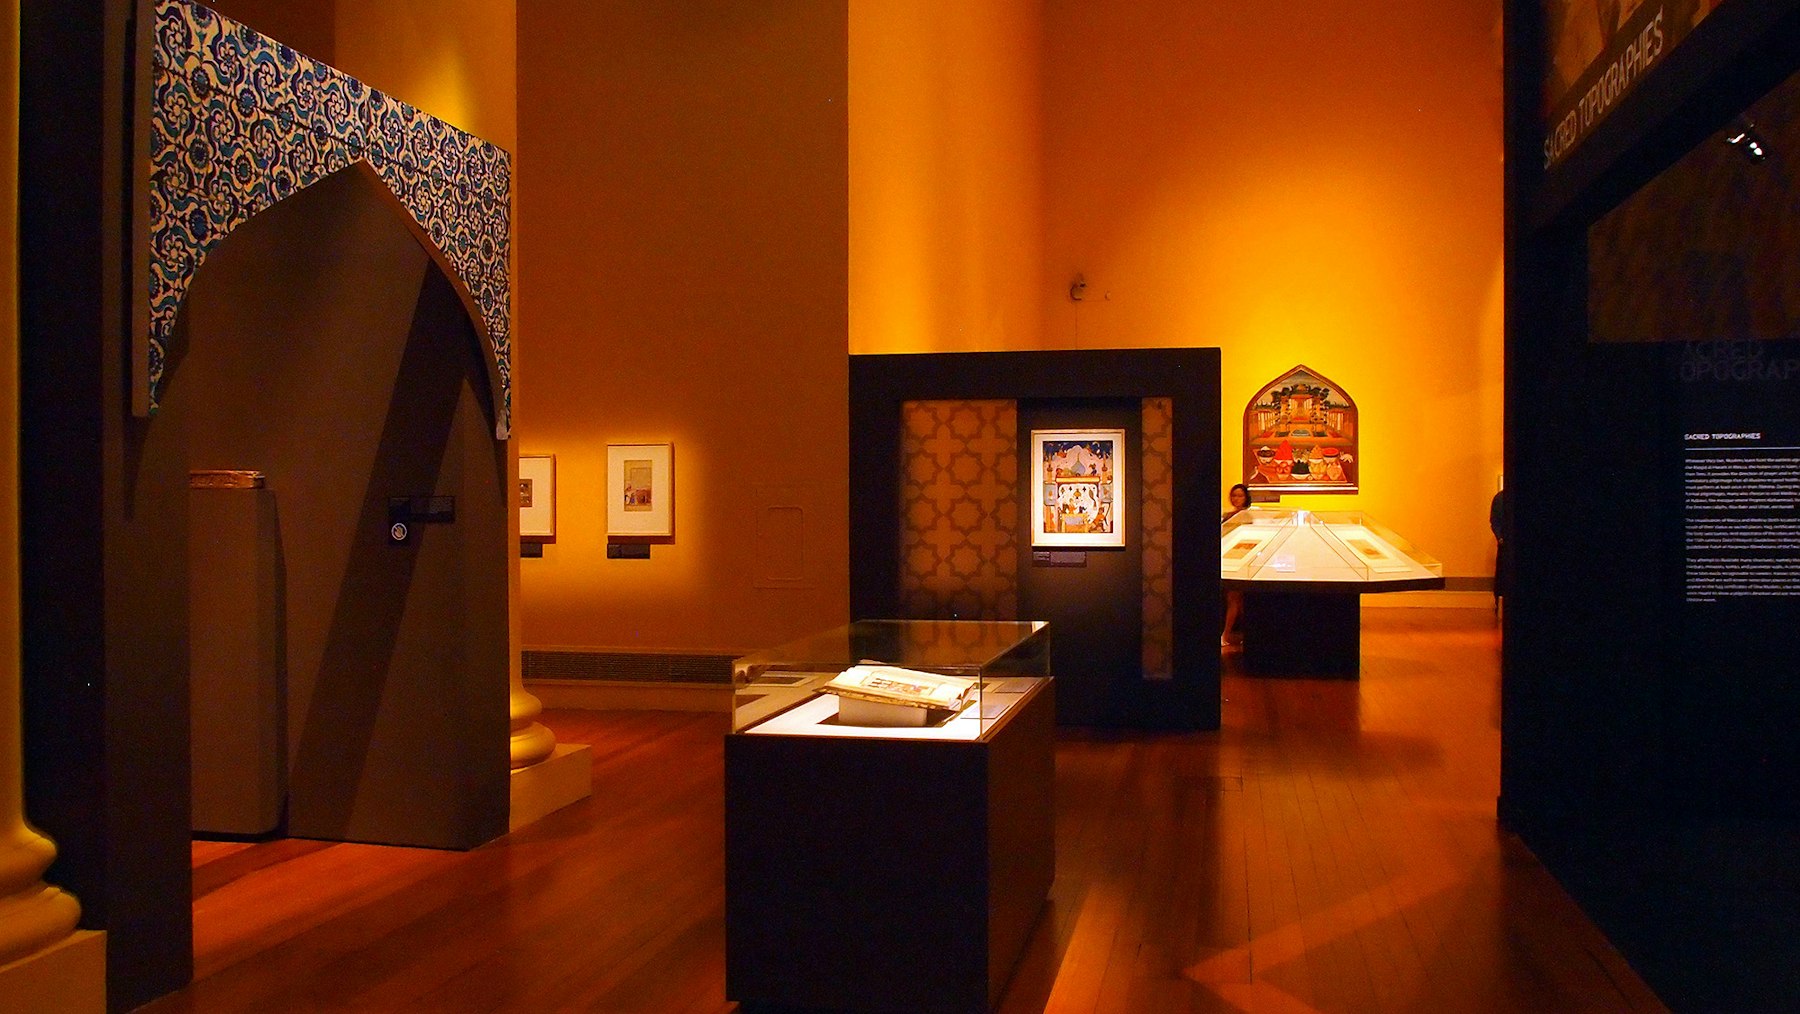 Treasures of the Aga Khan Museum exhibition opens in Singapore